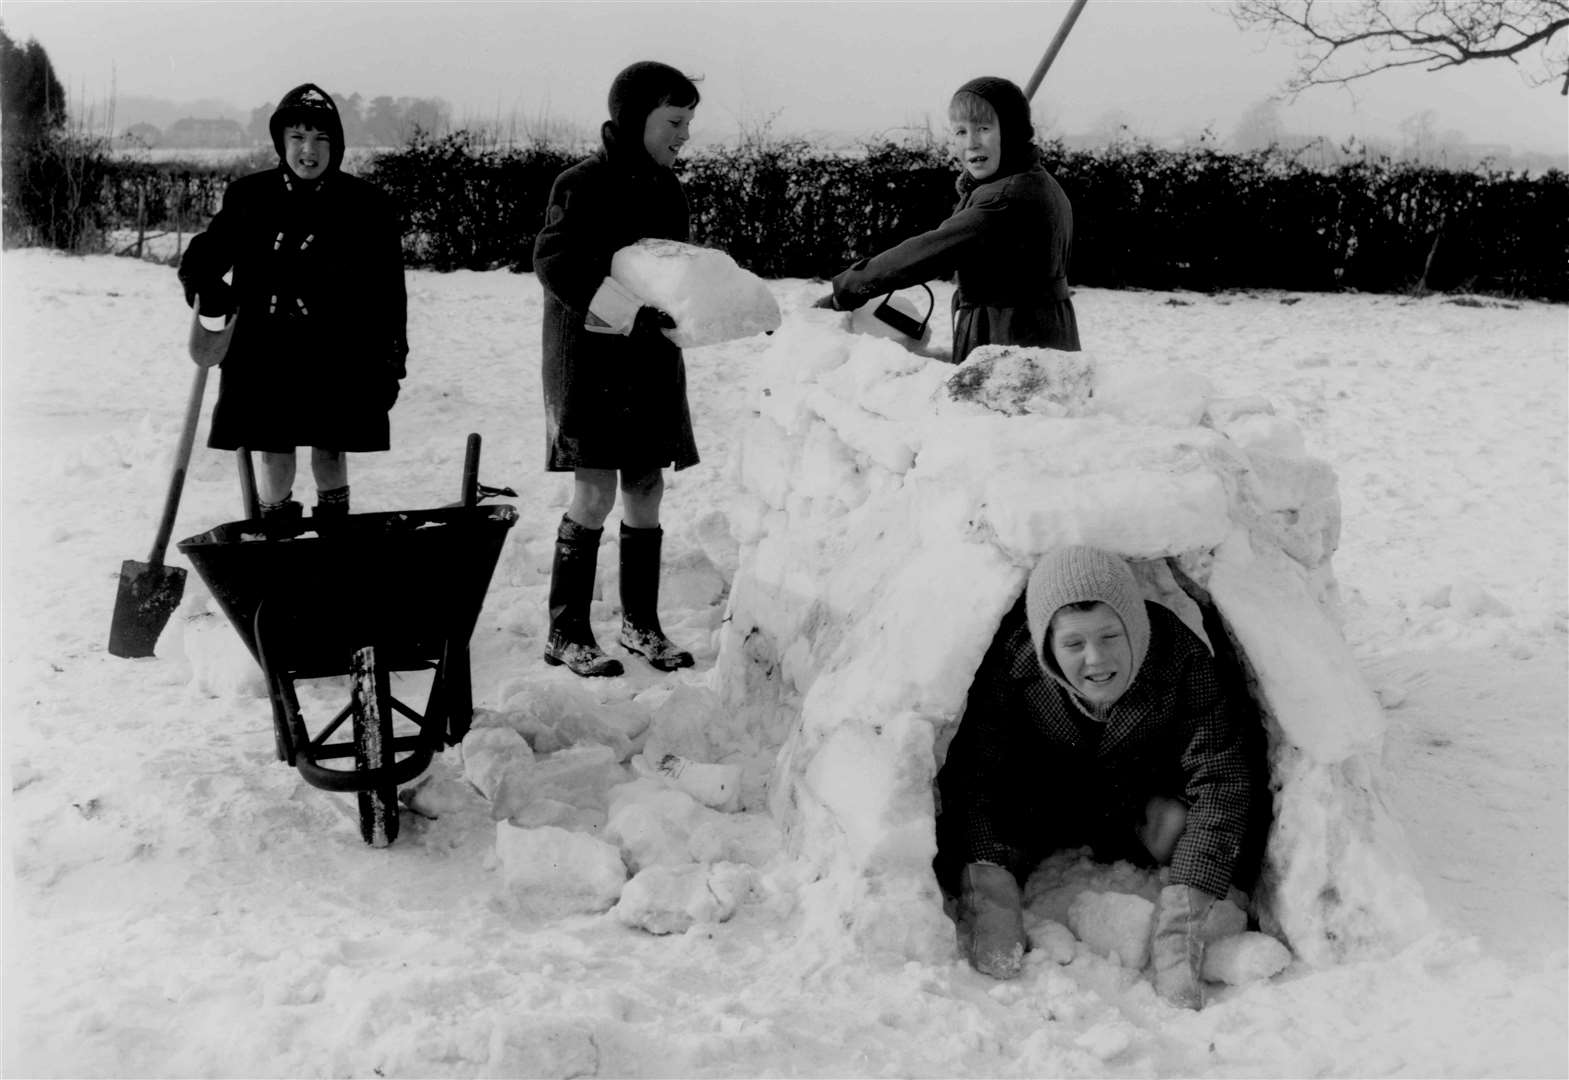 Children build an igloo at Bossingham in January 1963